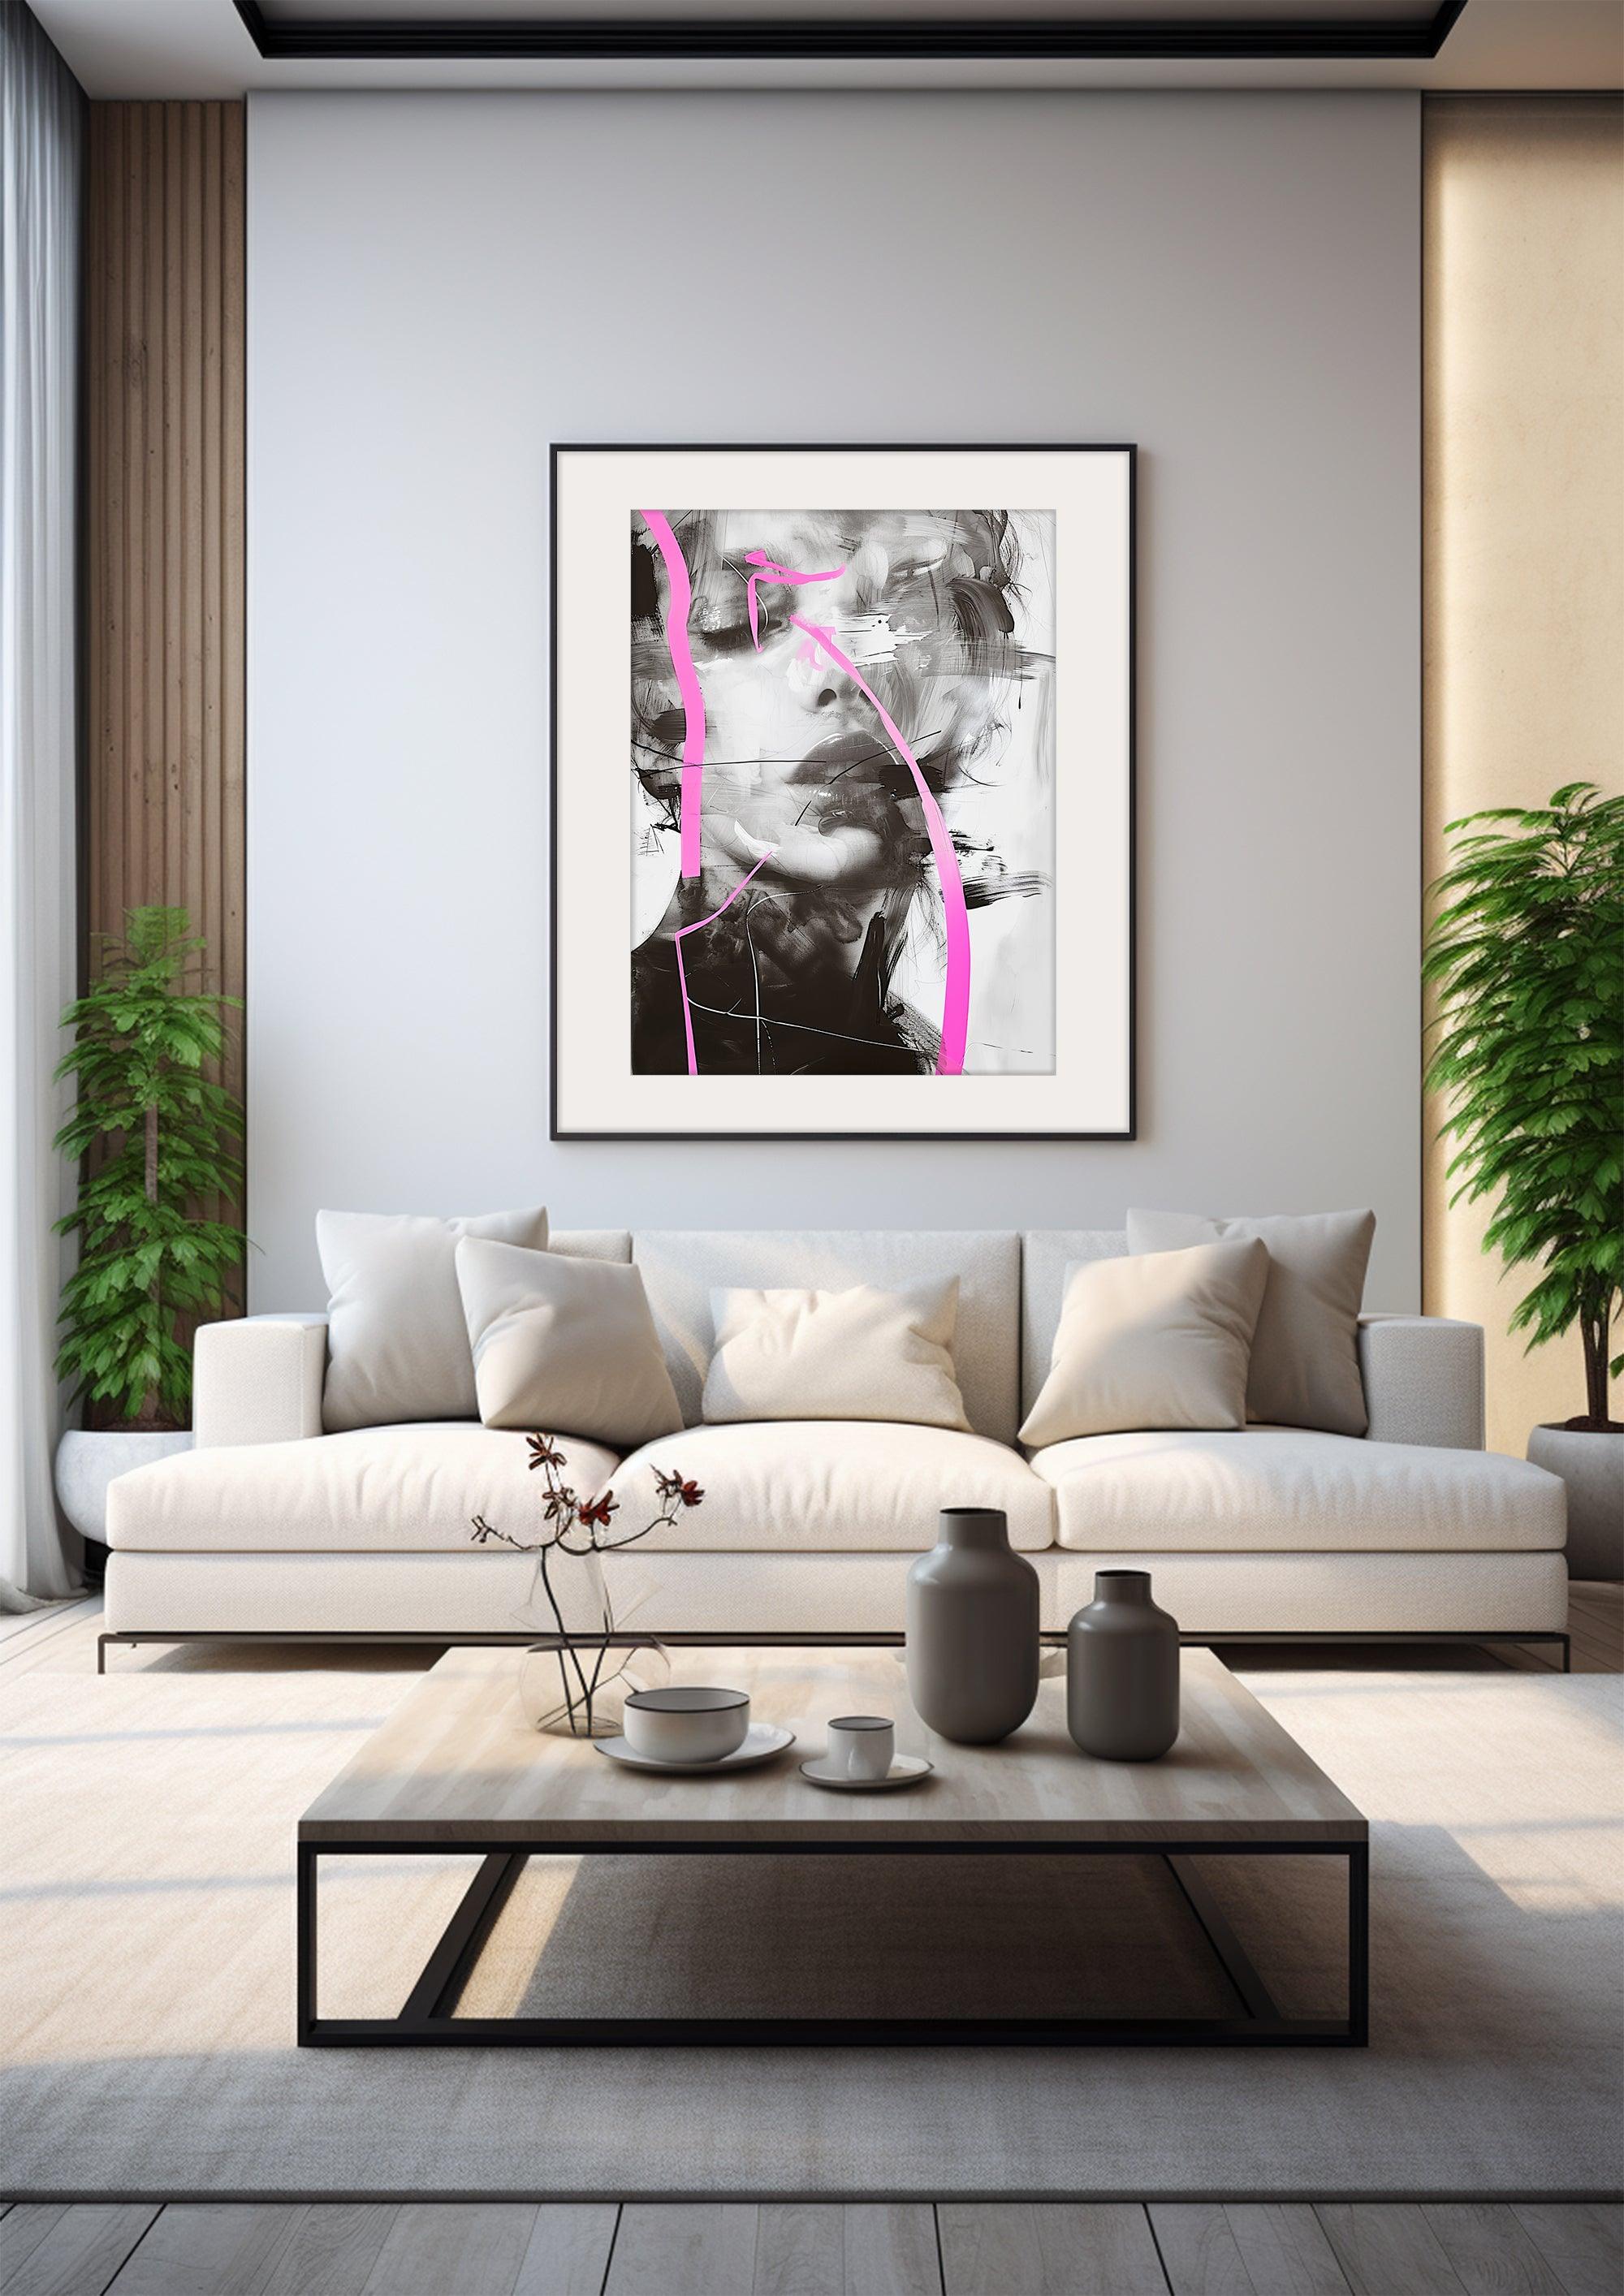 Fashion Forward: Modern Abstract Portrait & Lady Ink Art - Framed Poster Prints for Chic Home Decor